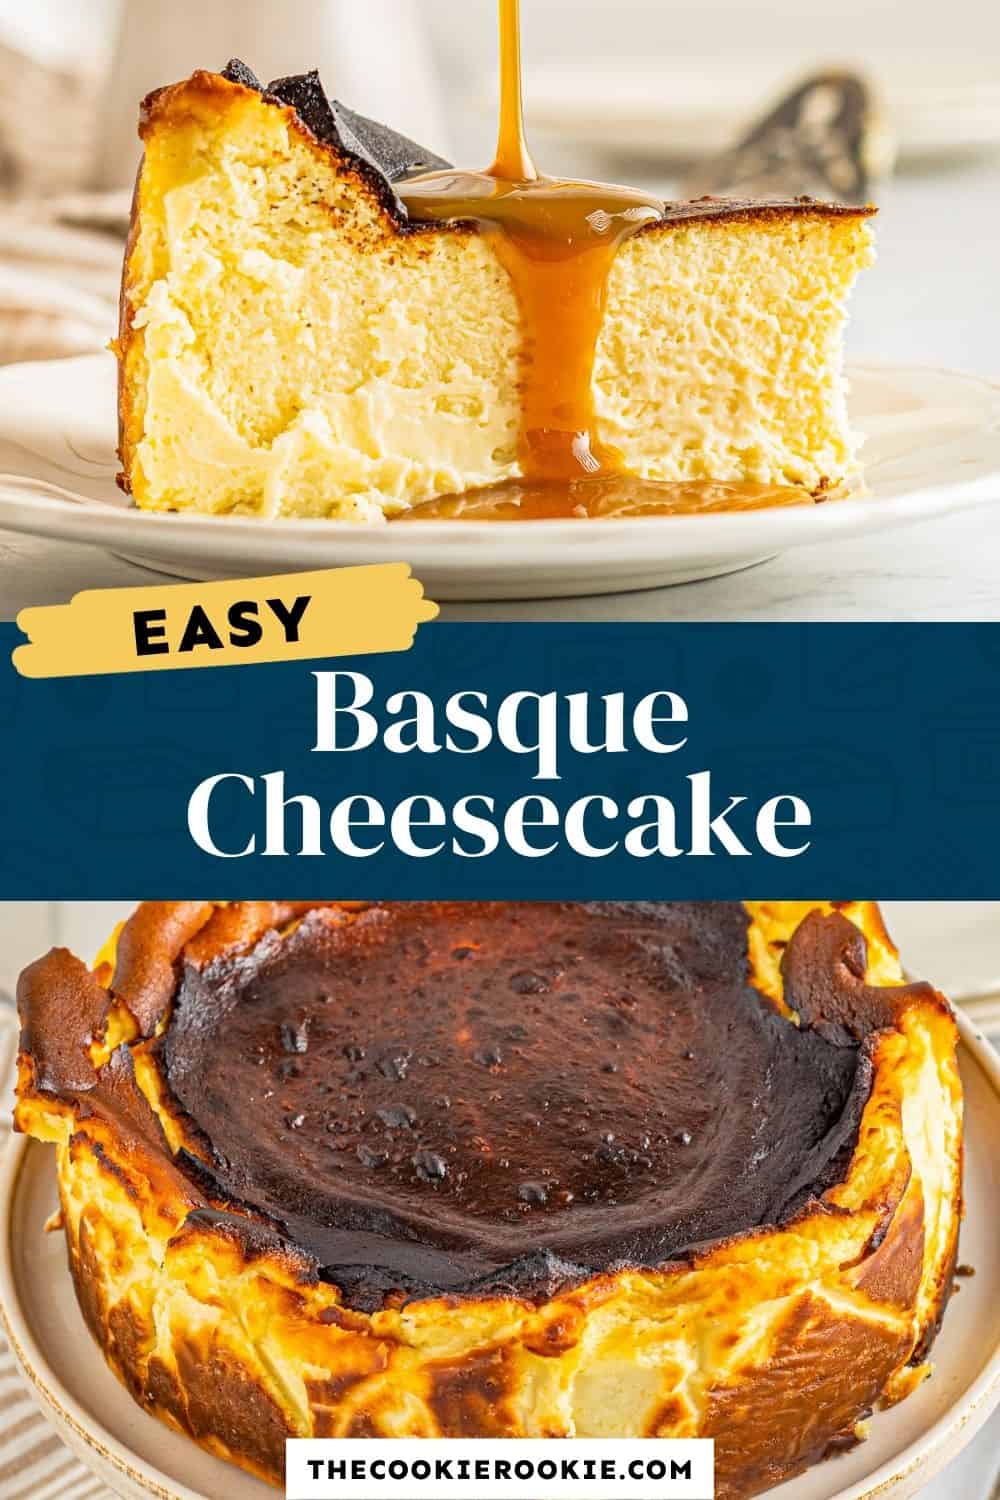 Basque Cheesecake Recipe - The Cookie Rookie®